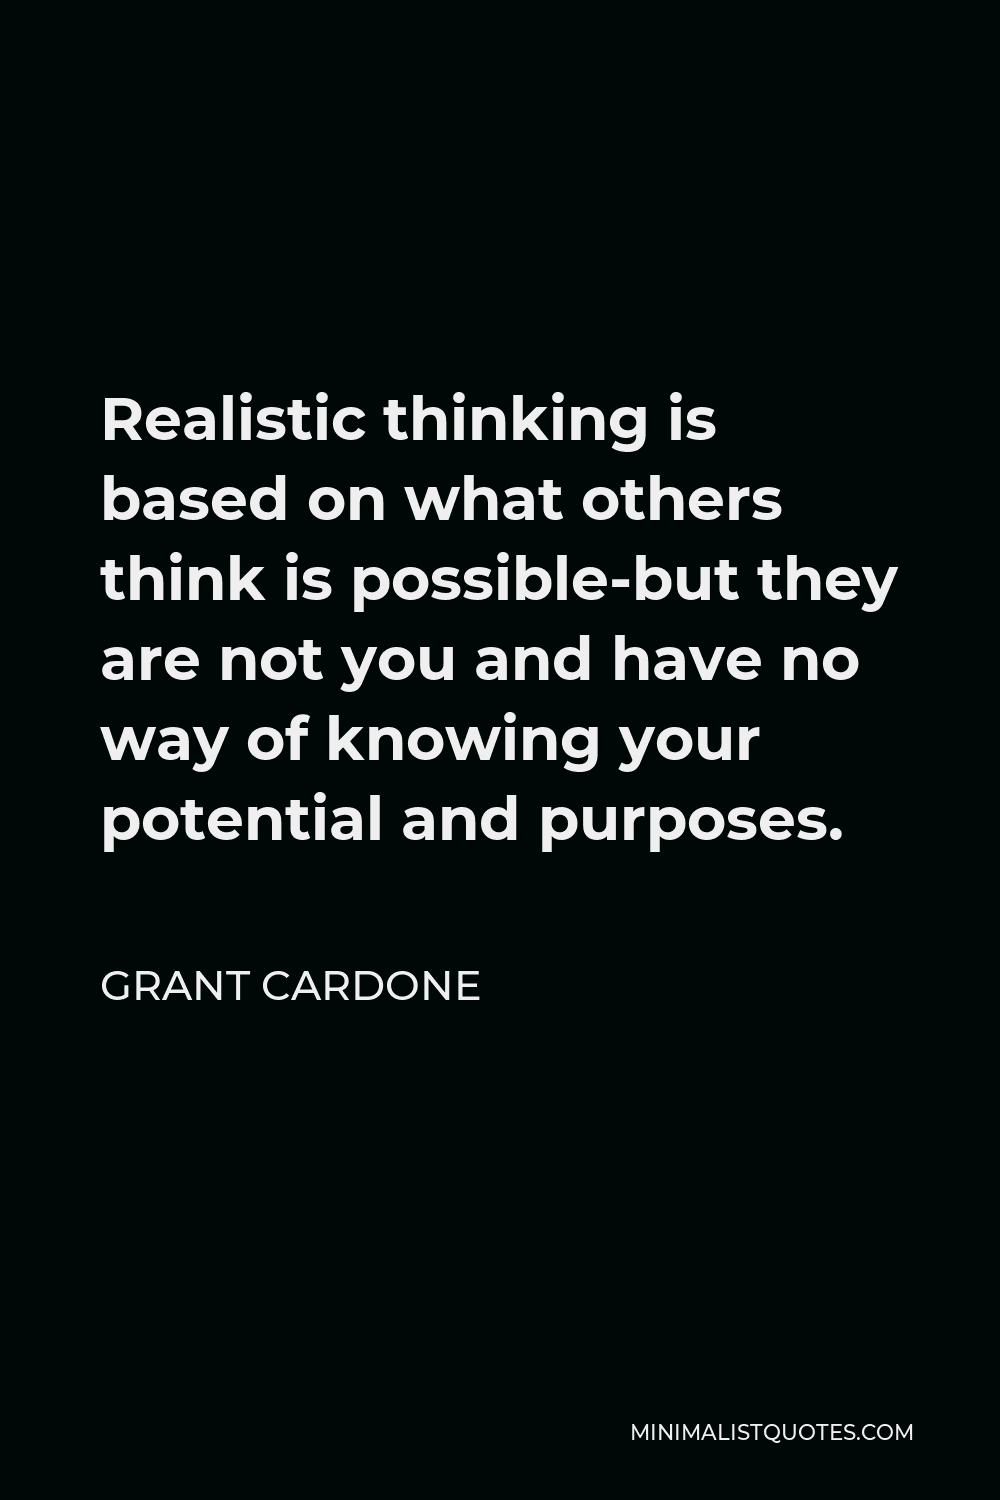 Grant Cardone Quote - Realistic thinking is based on what others think is possible-but they are not you and have no way of knowing your potential and purposes.